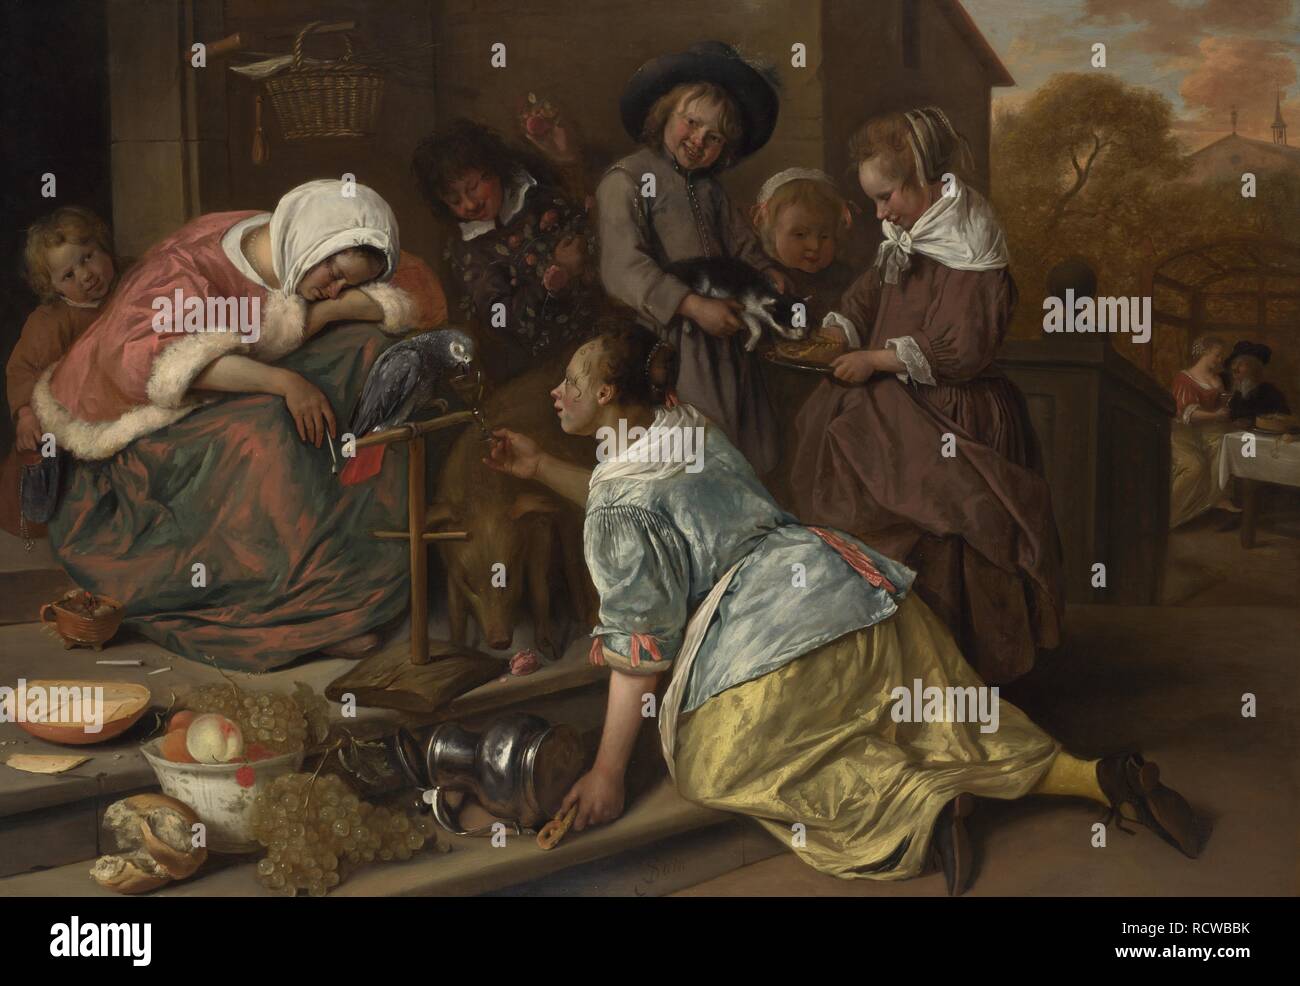 The Effects of Intemperance. Museum: National Gallery, London. Author: Steen, Jan Havicksz. Stock Photo